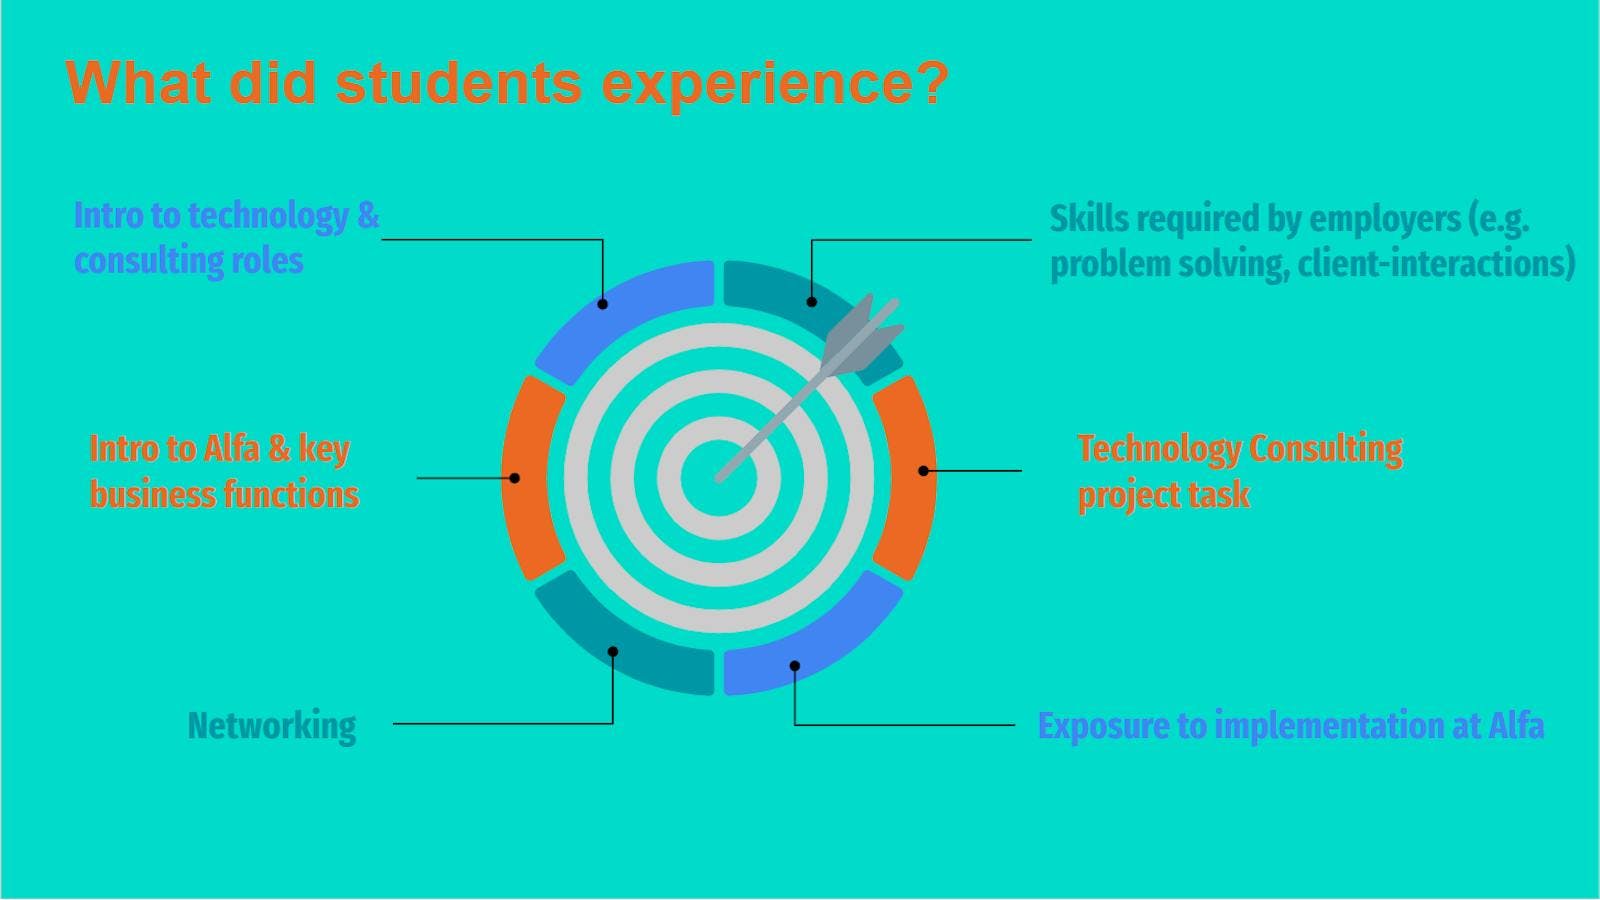 a chart showing student work experience, in equal parts introduction to technology and consulting roles; intro to alfa and key business functions; networking; skills required by employees); technology consulting project task; exposure to implementation at alfa